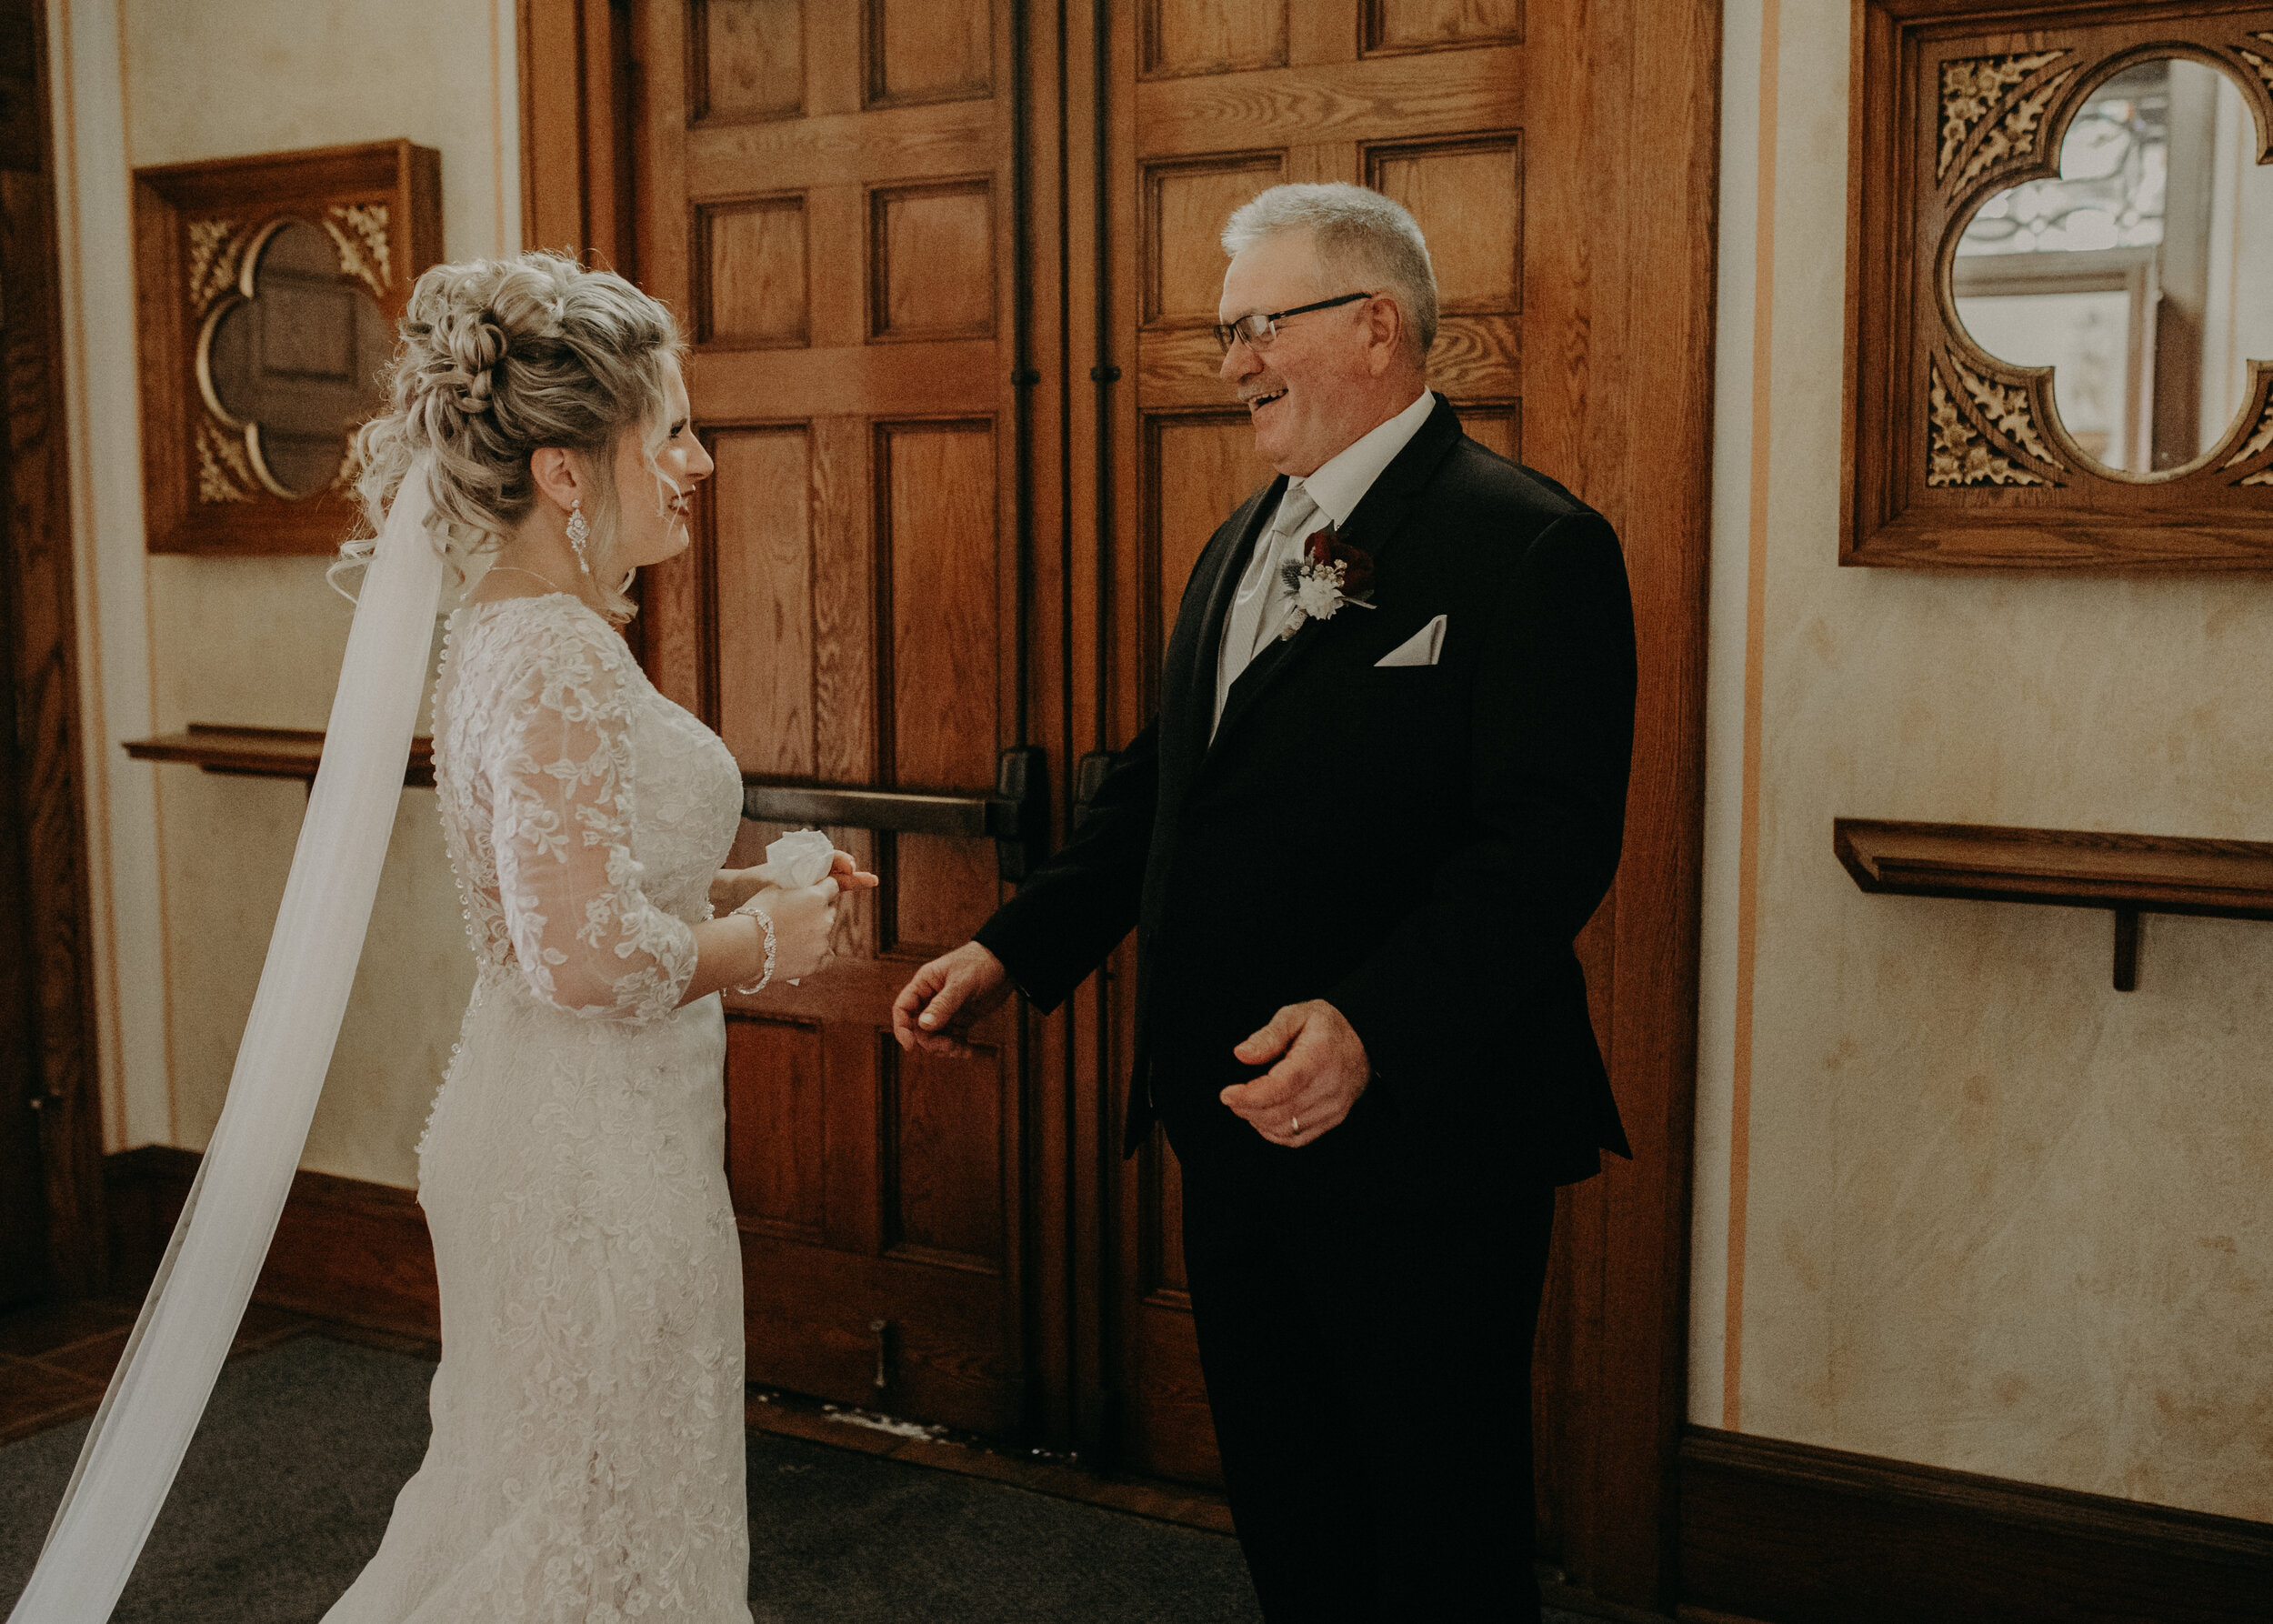  Andrea Wanger Photography cozy winter Wisconsin wedding. Perfect Wisconsin wedding in February. Elegant winter wedding bride and dad emotional first look in church. 